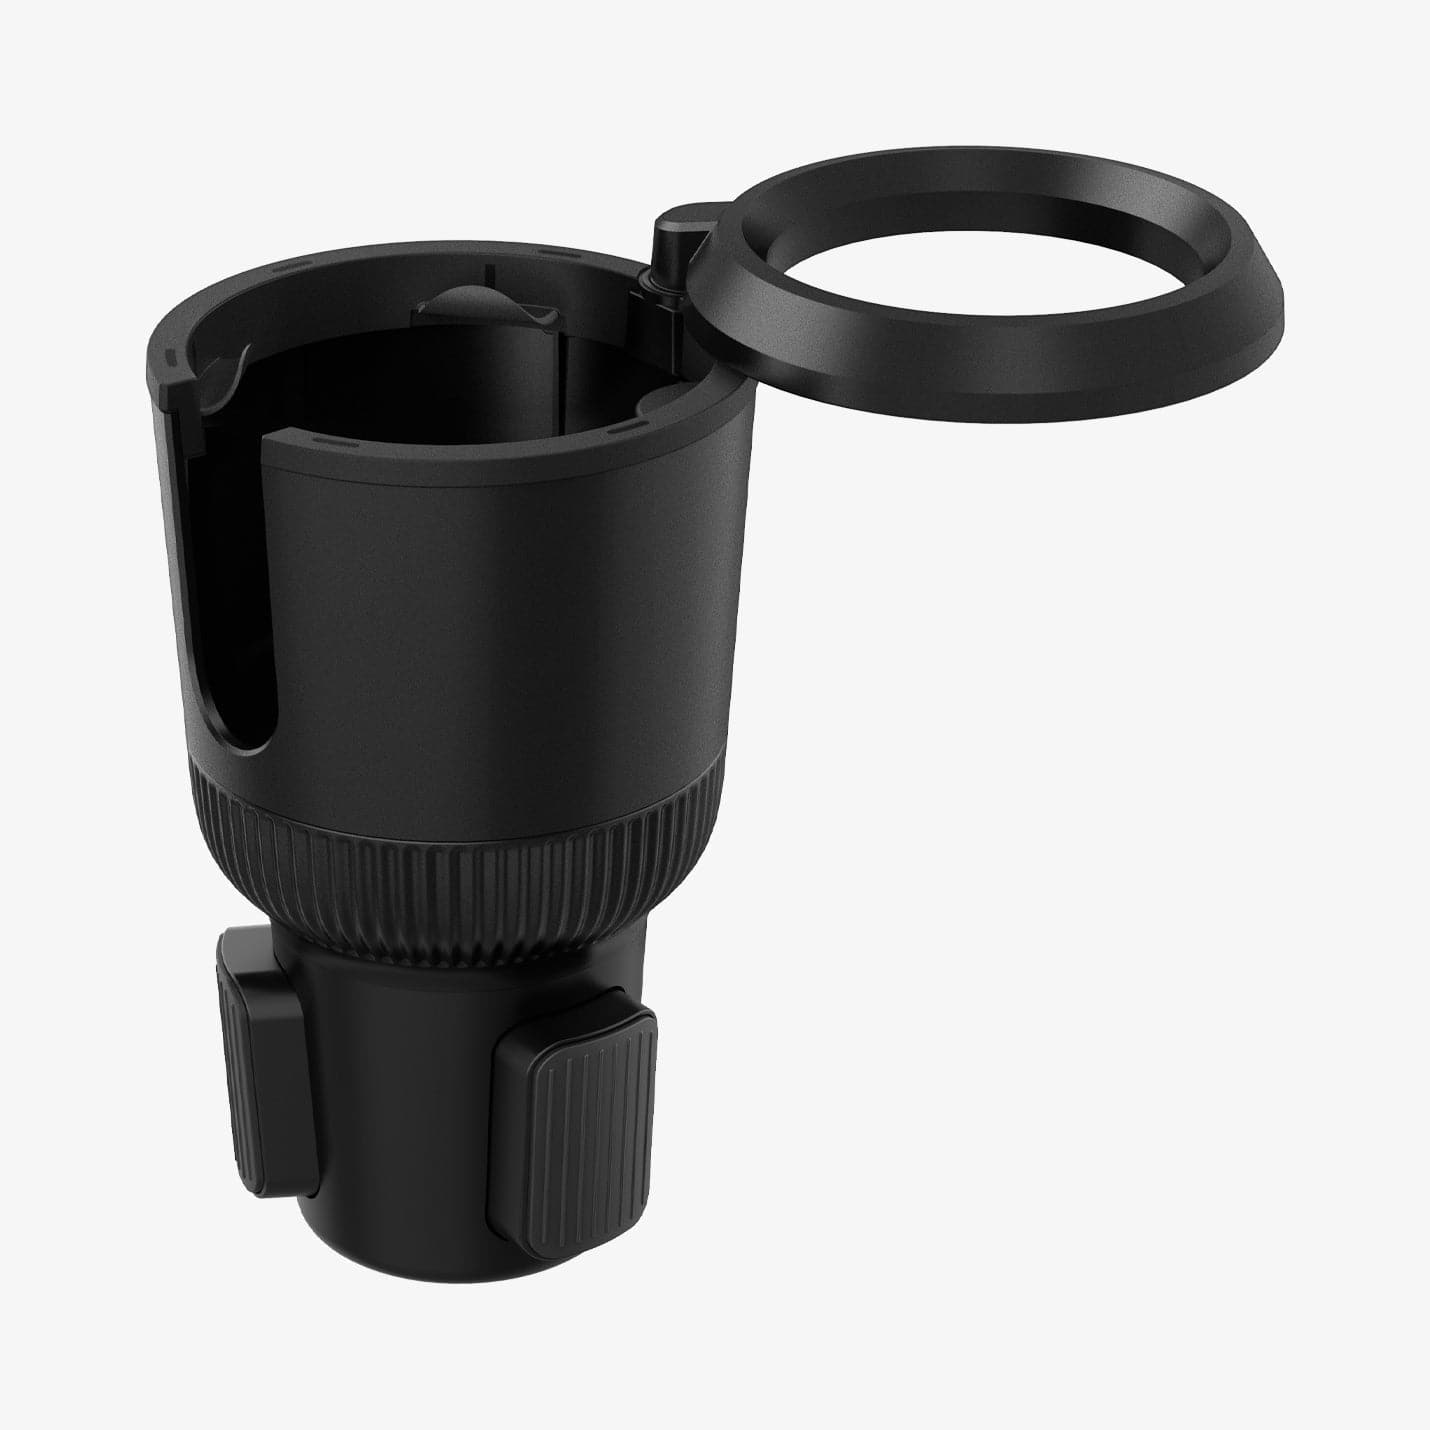 ACP02235 - CH100 Hydrohub Cup Holder Adapter in black showing the cup holder and adjustable top cup slot extended out